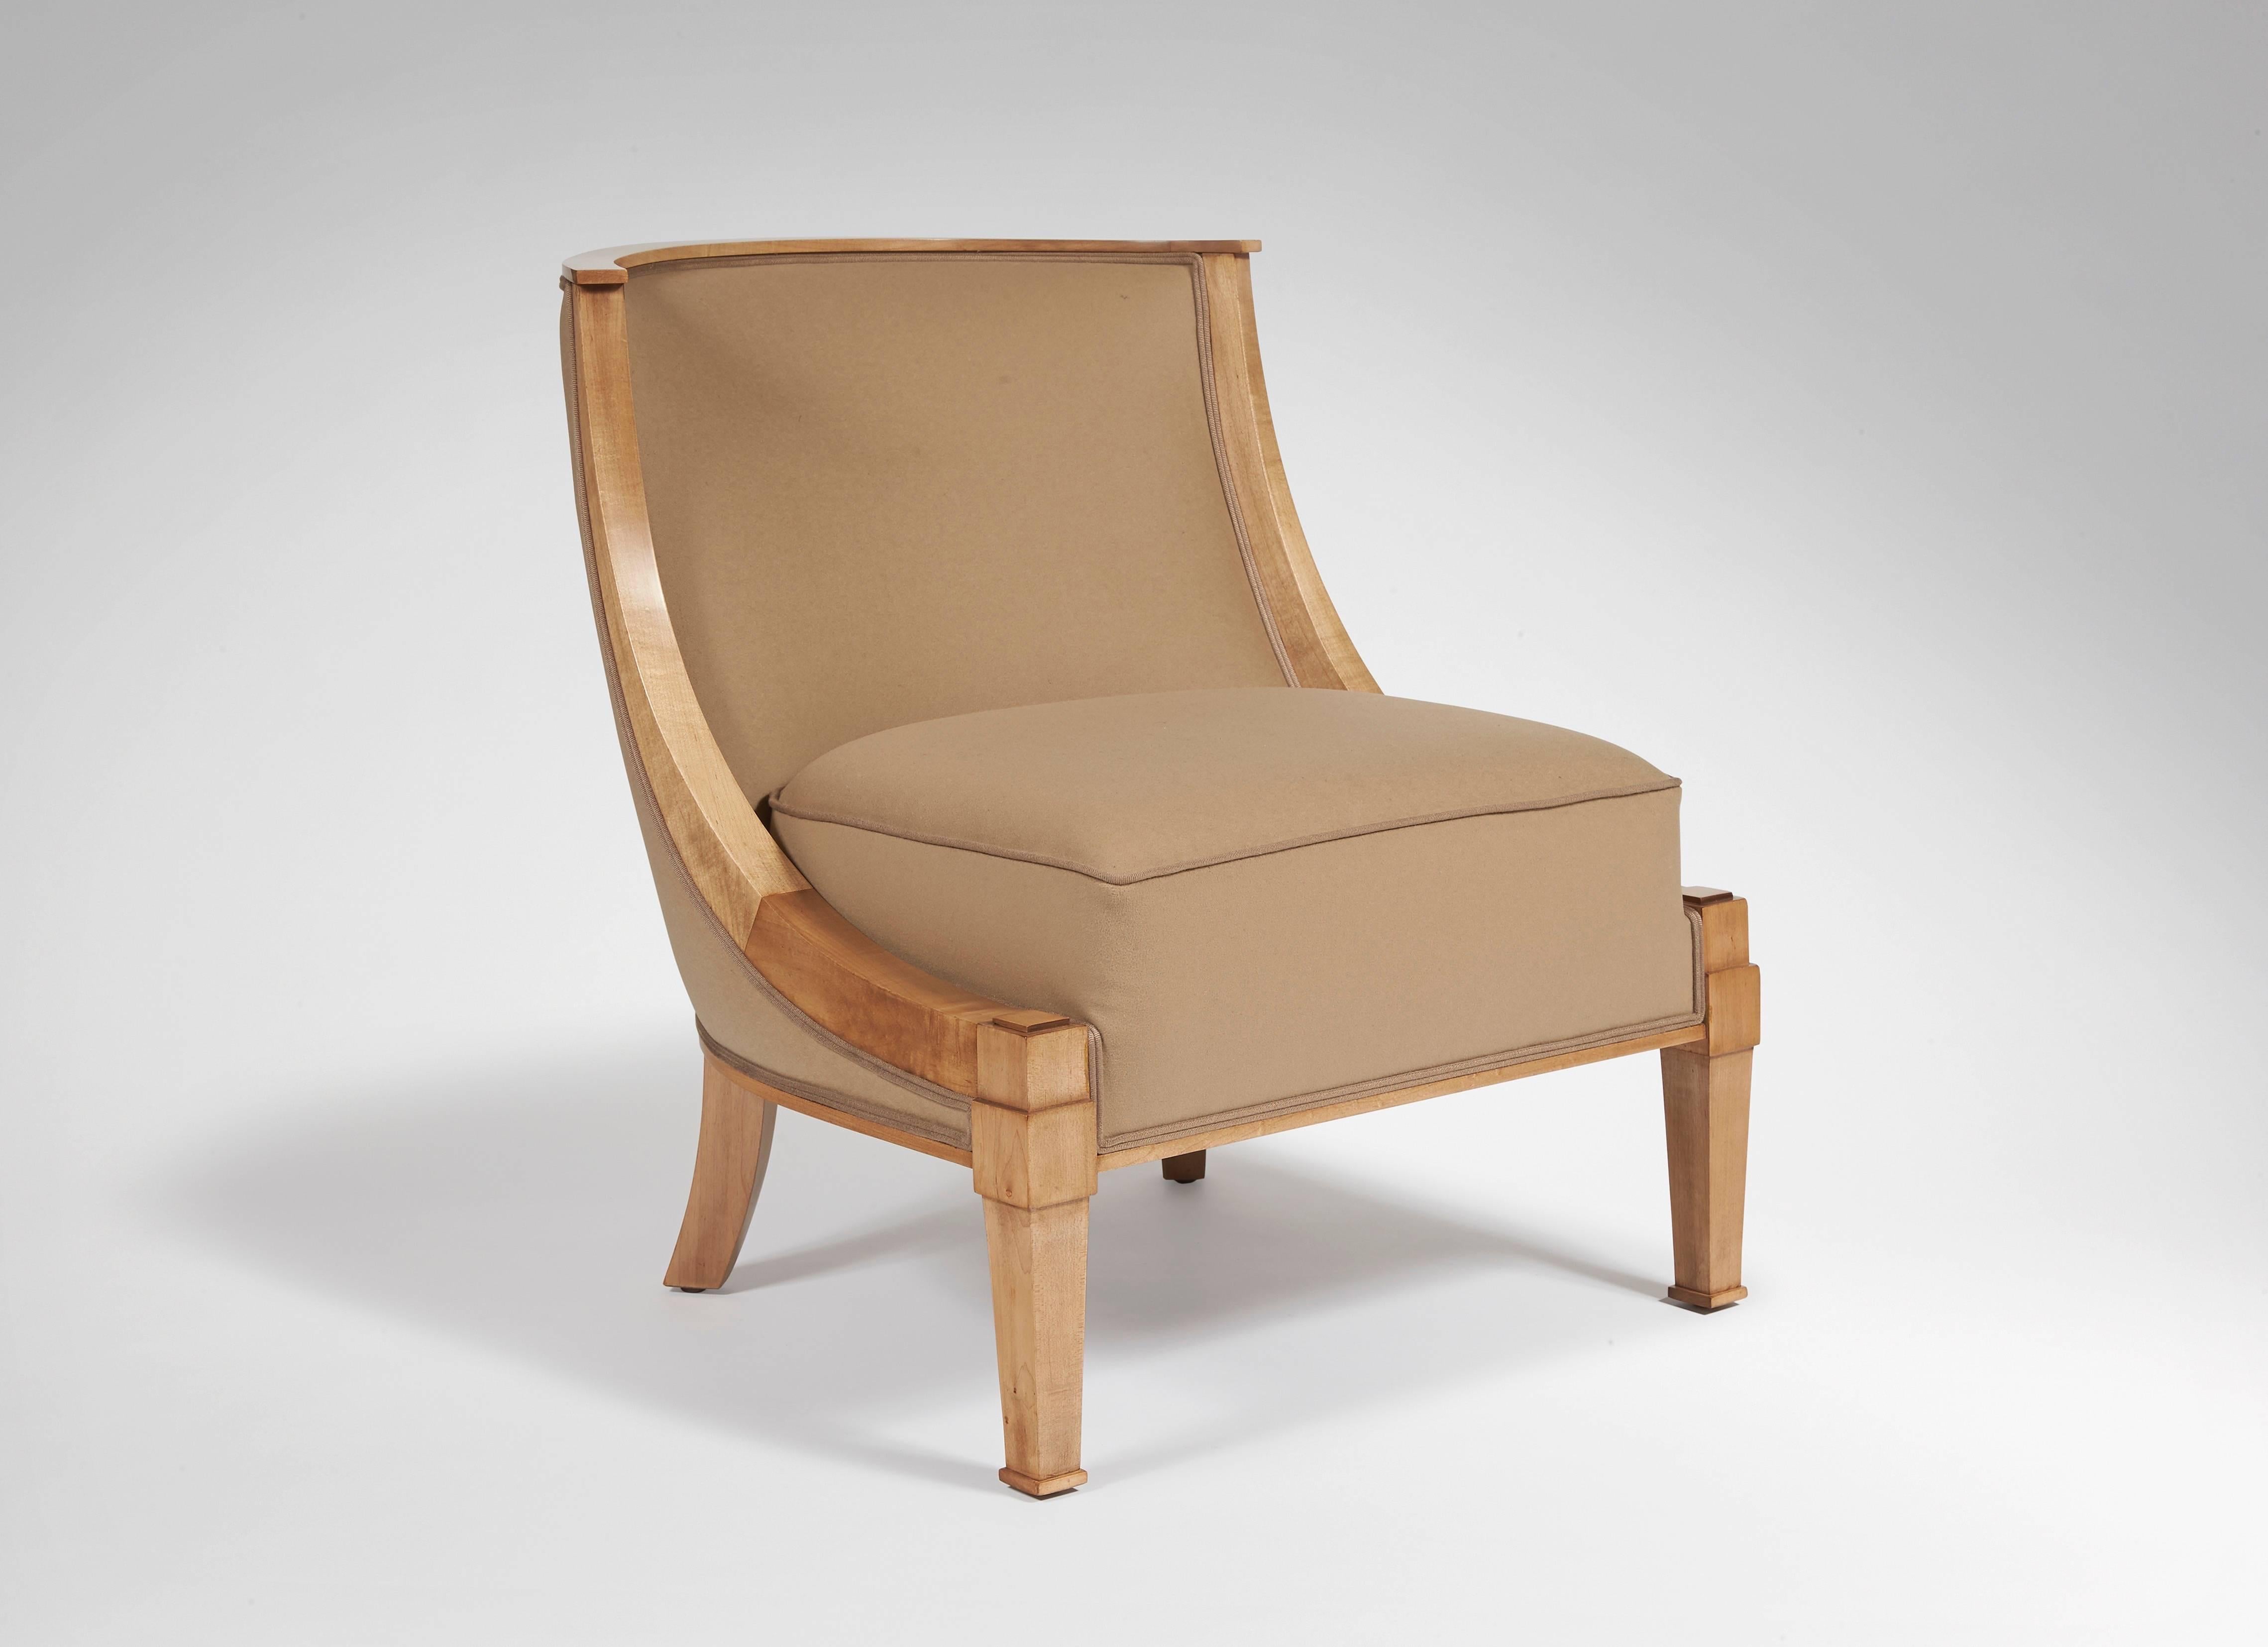 Fireside chair in the antique style in sycamore, the front legs crowned with capitals, ending with squared hoof, the back sword legs, gondola backrest, circular arcs armrests, covered with beige fabric.